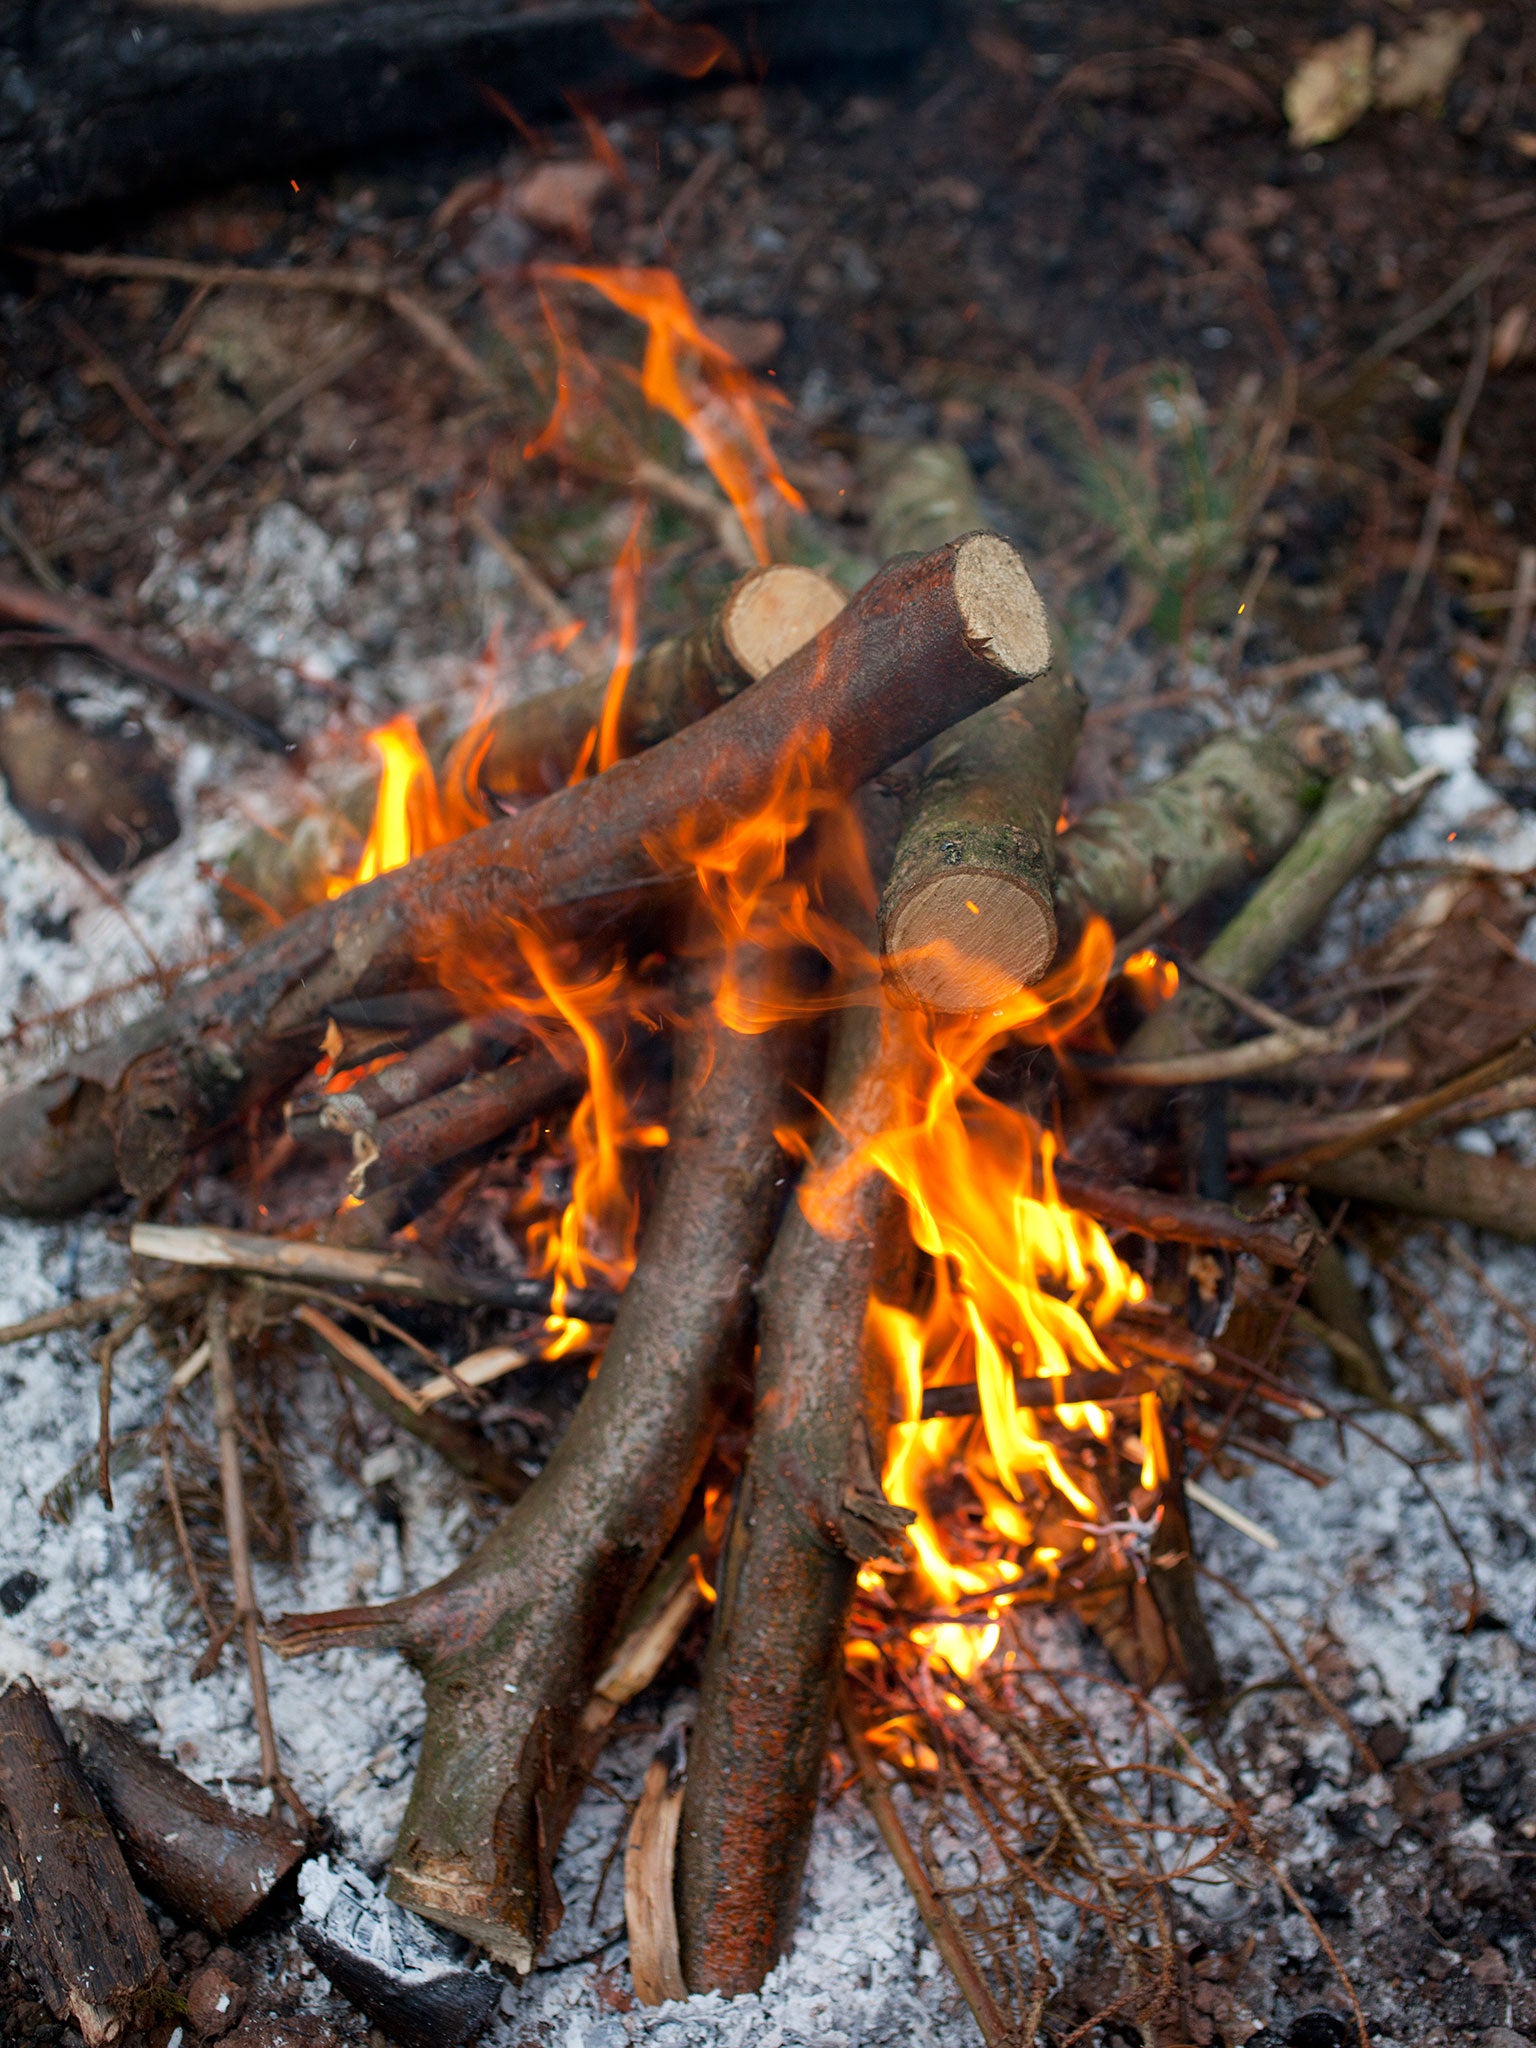 For a good bonfire, you want wood that has been seasoning for nine months or more